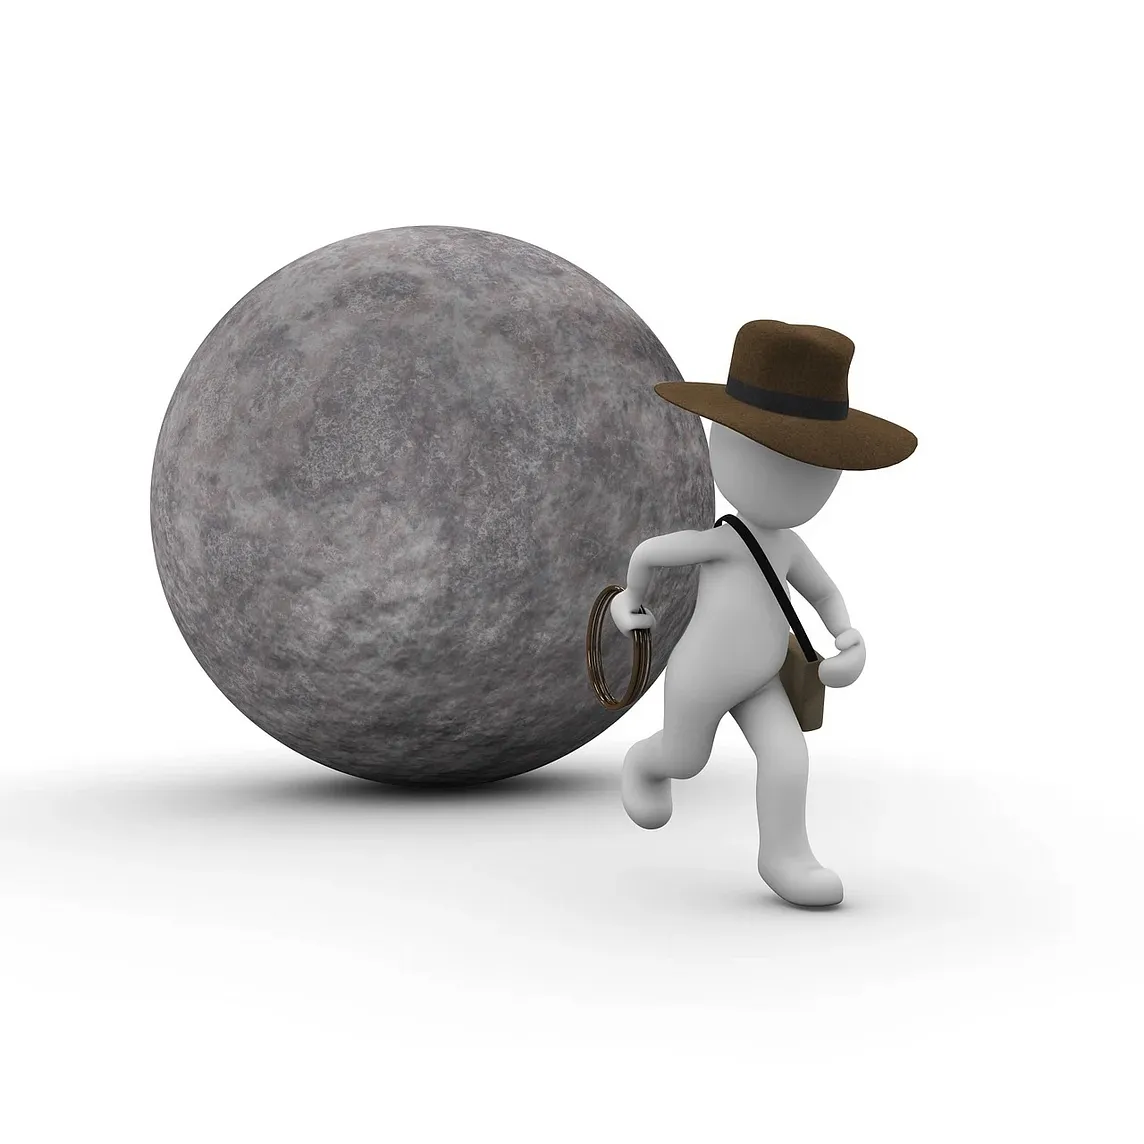 large rock rolling after indiana jones character the way it happened in the movie